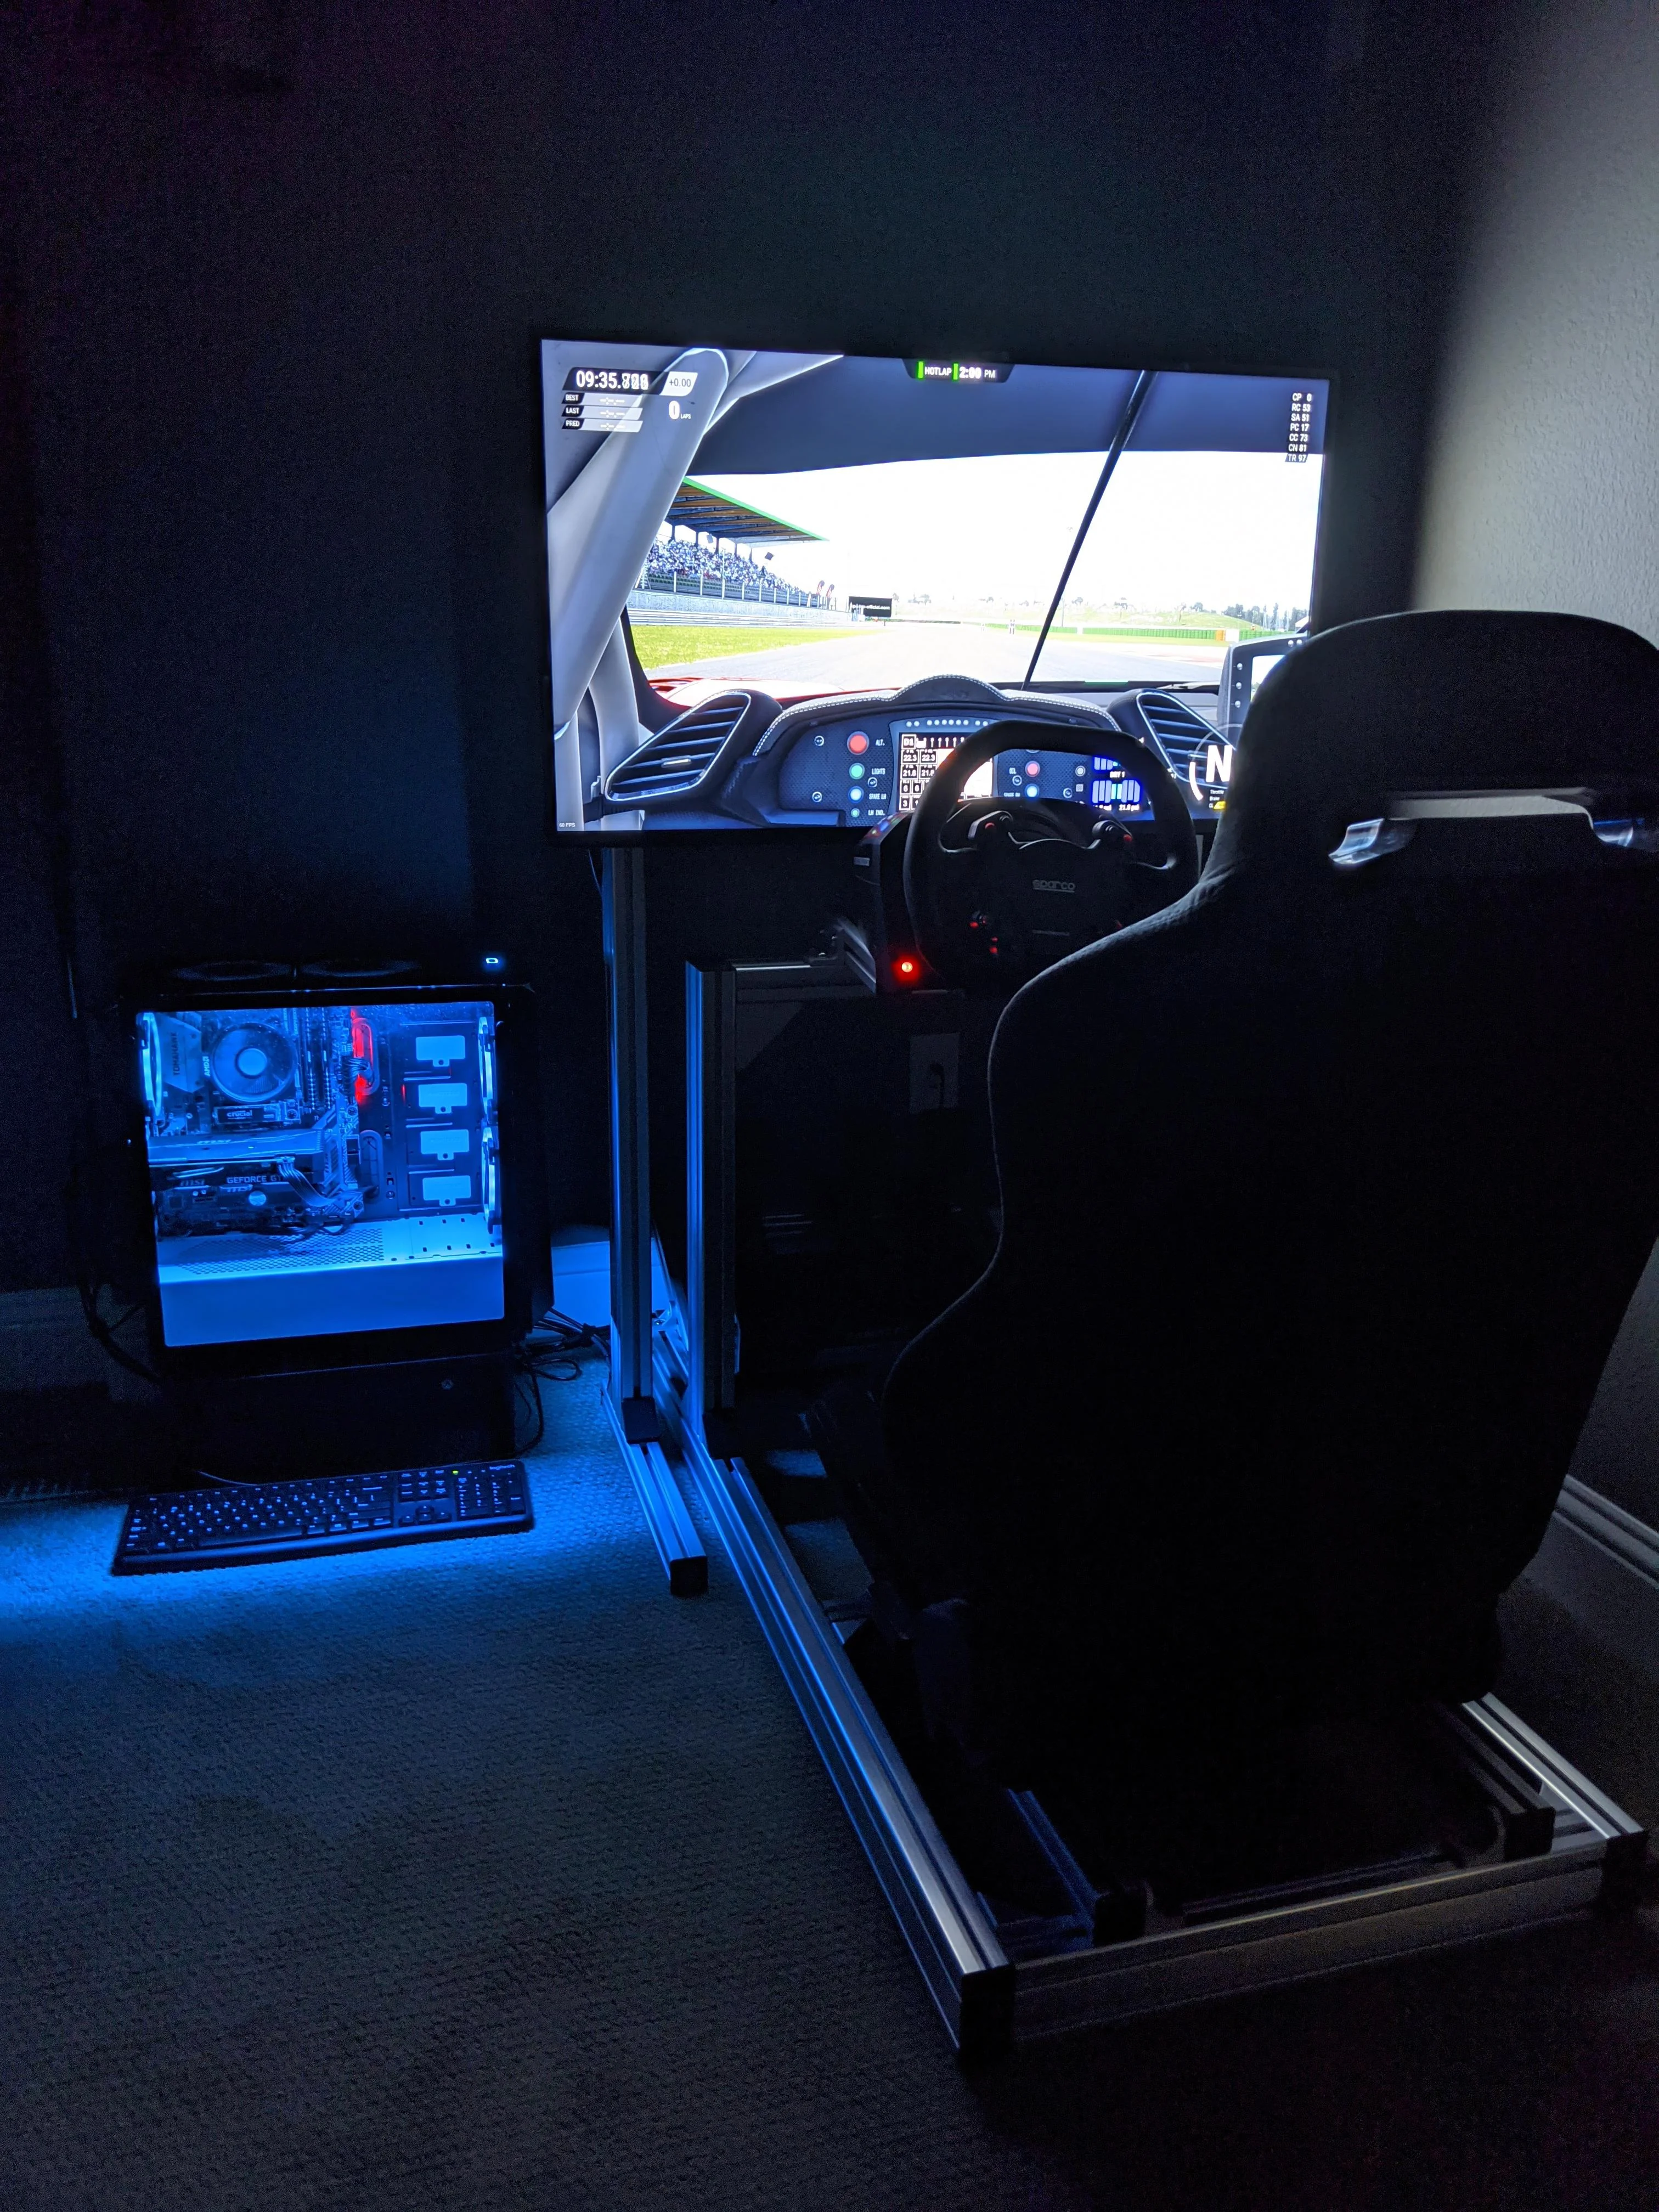 Gaming setup with rigmetal chair in a gaming room